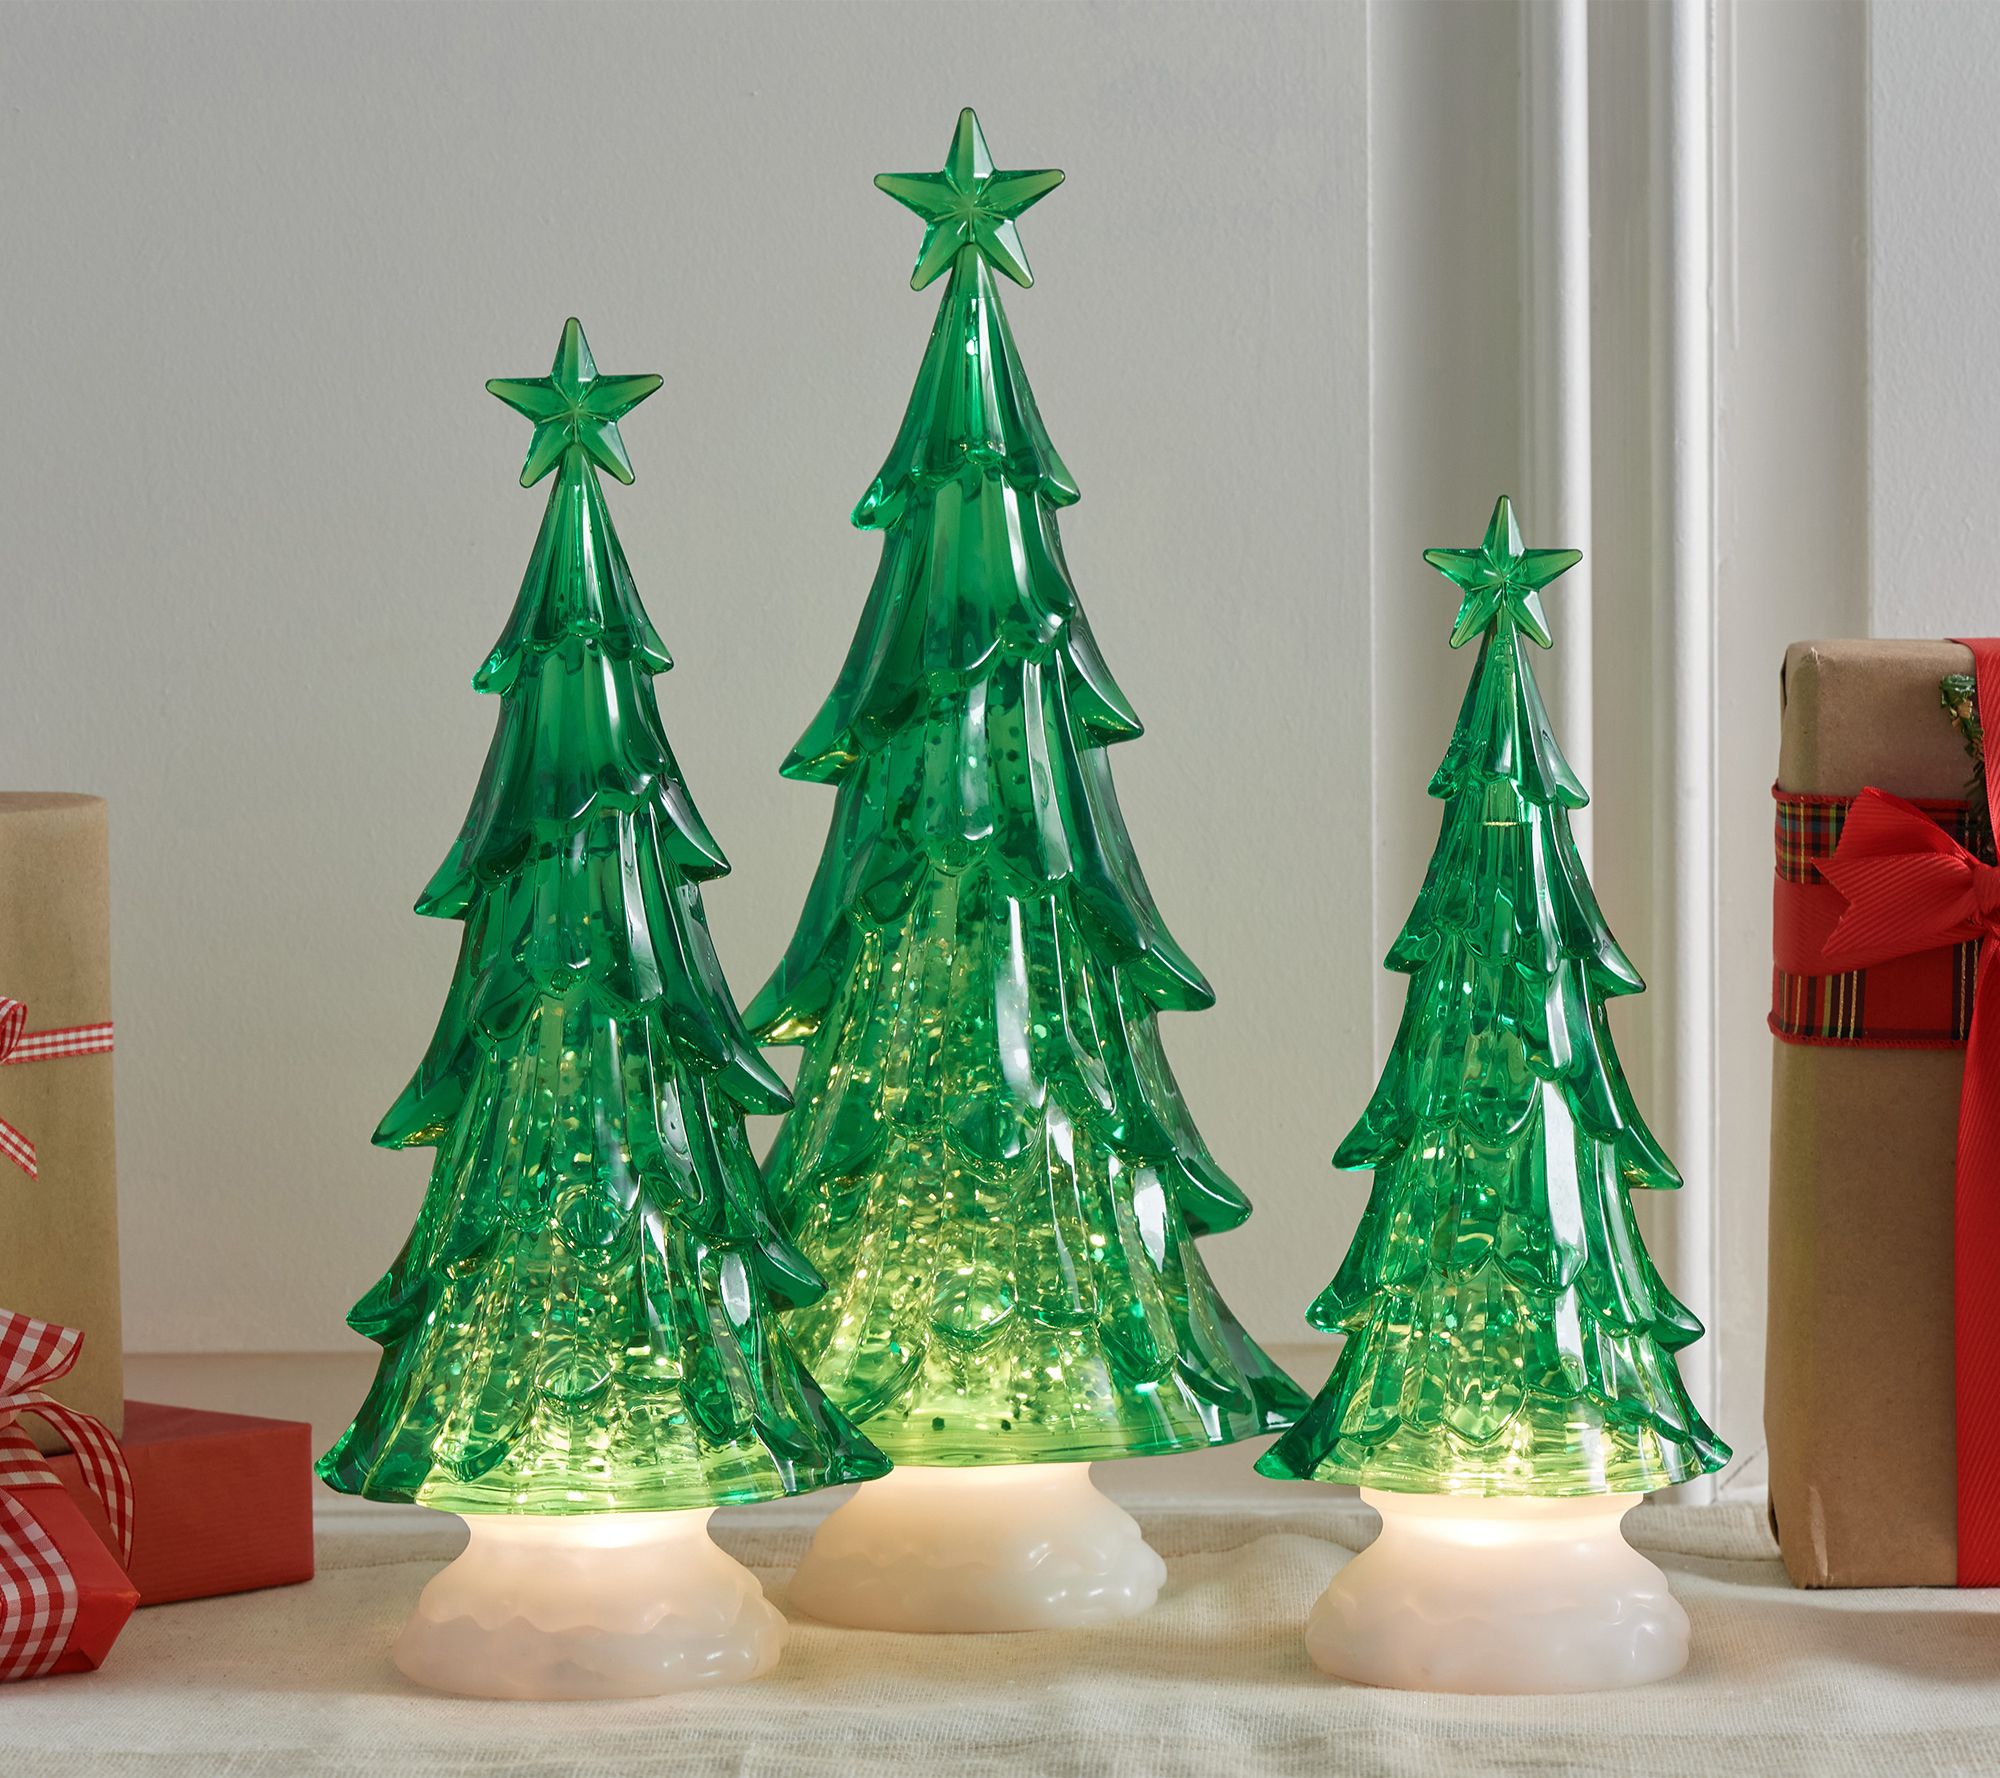 3 Illuminated Wax Trees by Valerie IVORY W/ GOLD QVC H205470 FREE SHIPPING 